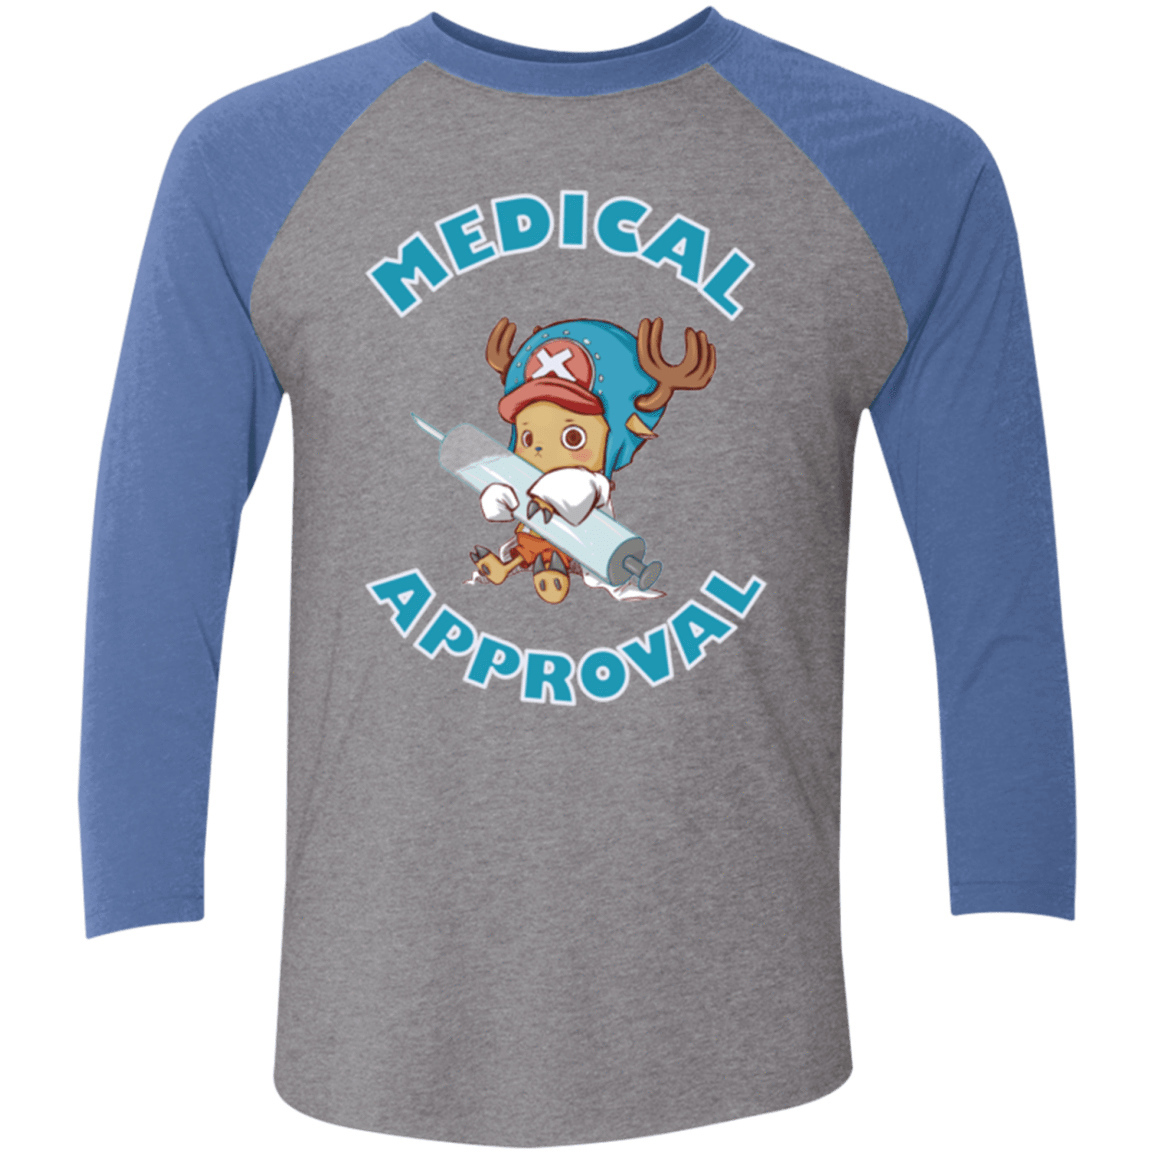 T-Shirts Premium Heather/ Vintage Royal / X-Small Medical approval Triblend 3/4 Sleeve